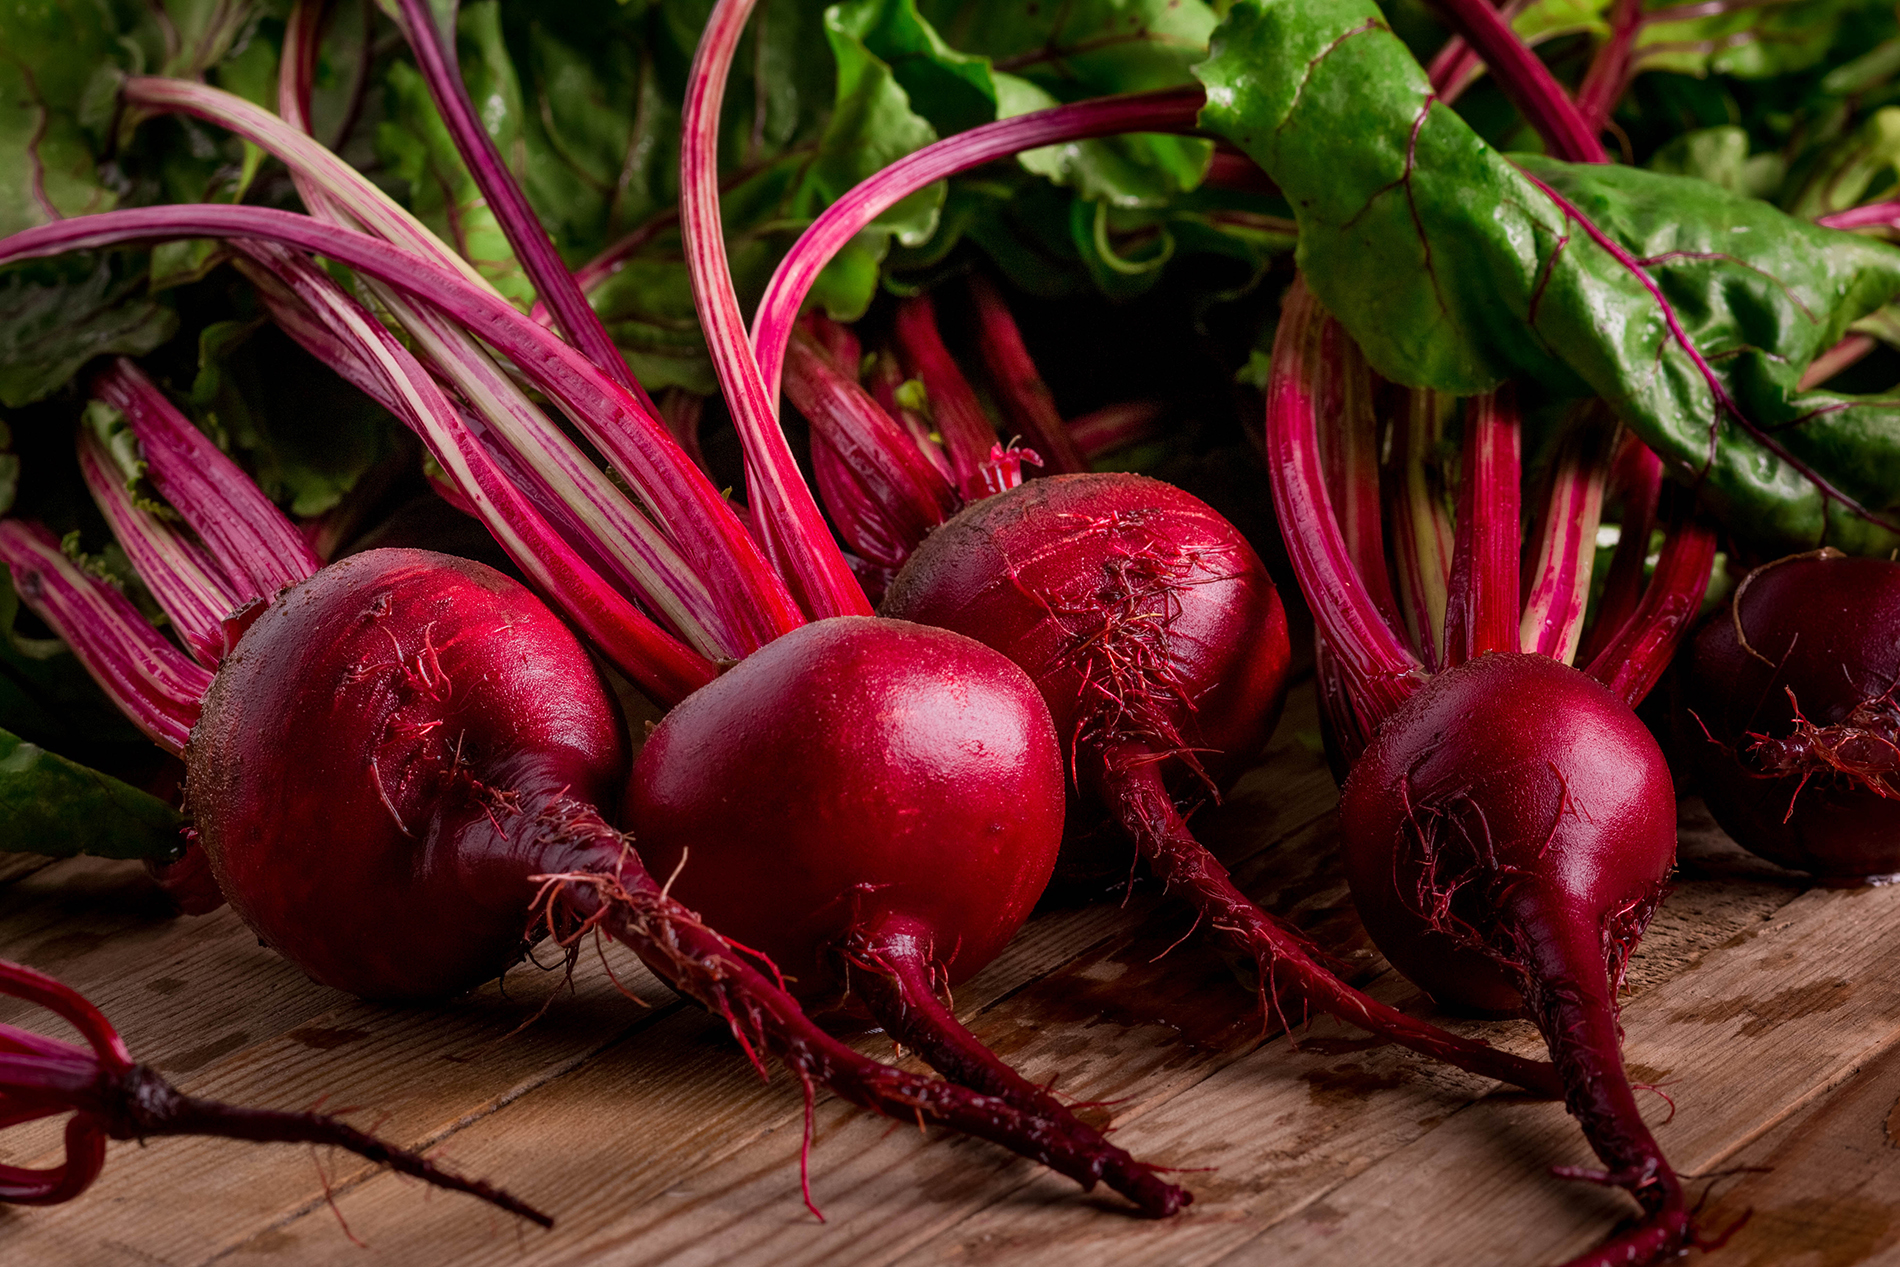 Red beets with stems